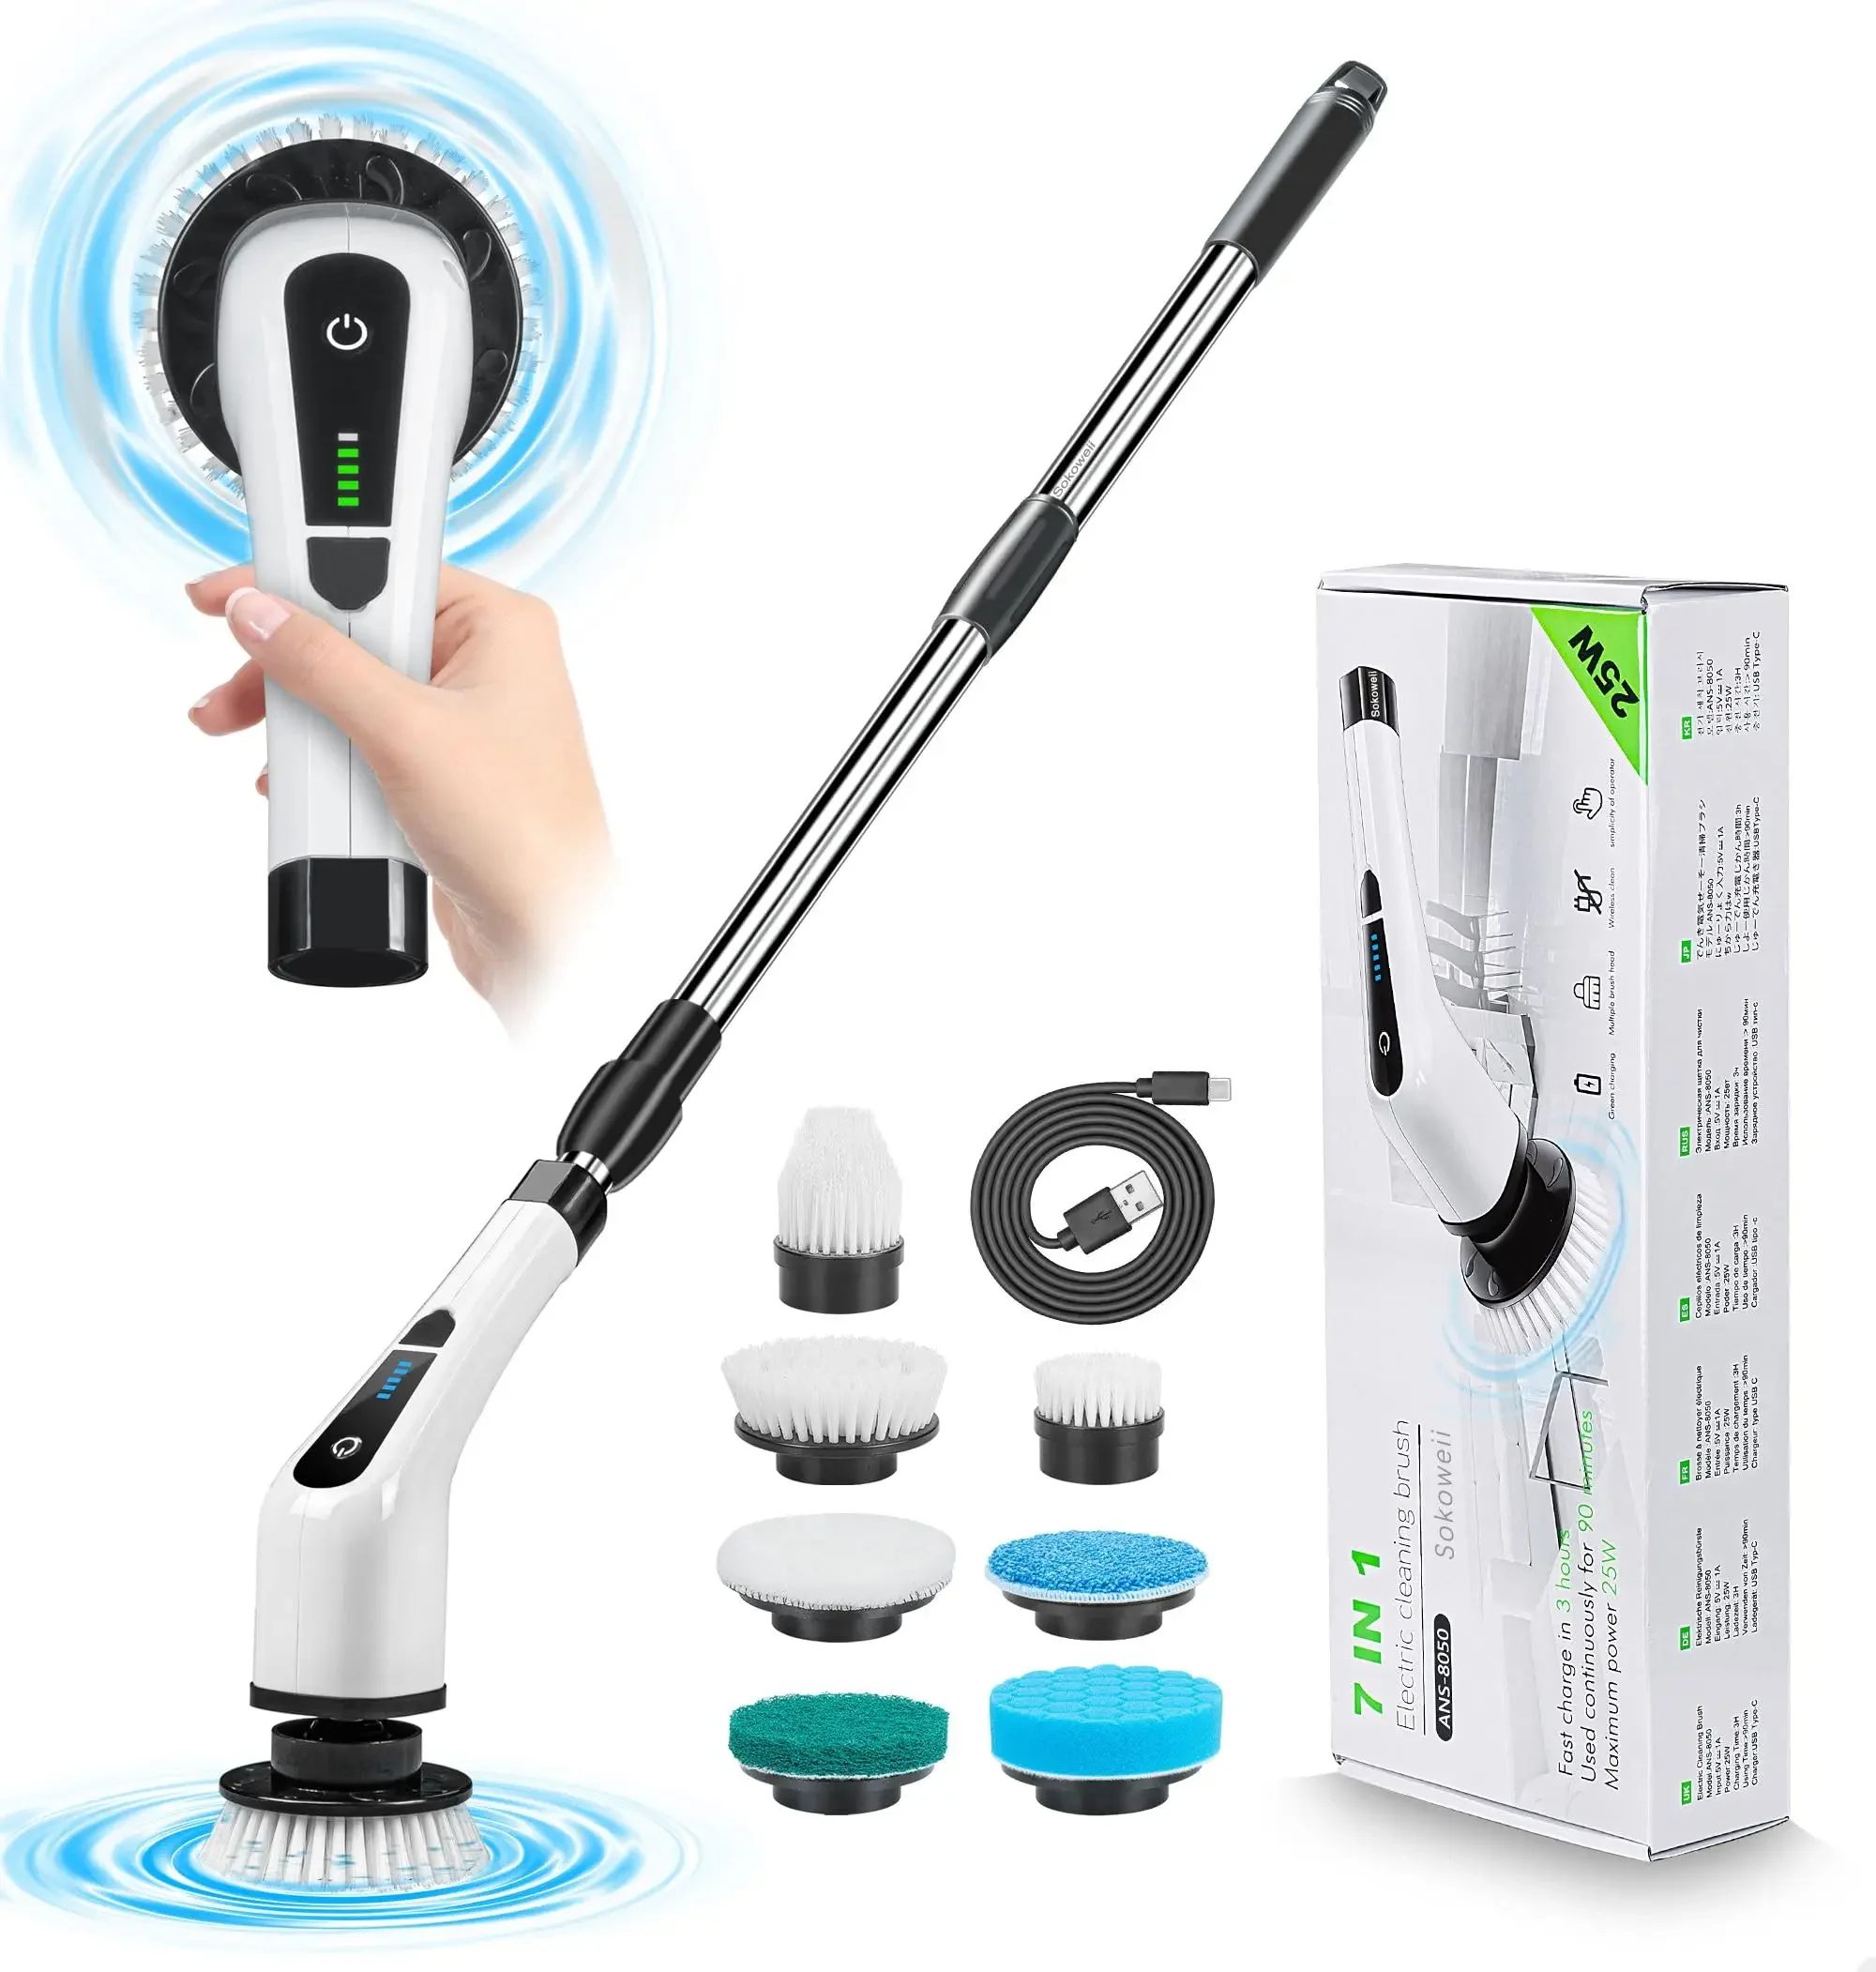 

9in1 Cordless Electric Turbo Scrub Cleaning Brush Multifunctional Long Handle Spin Scrubber Bathroom Accessories